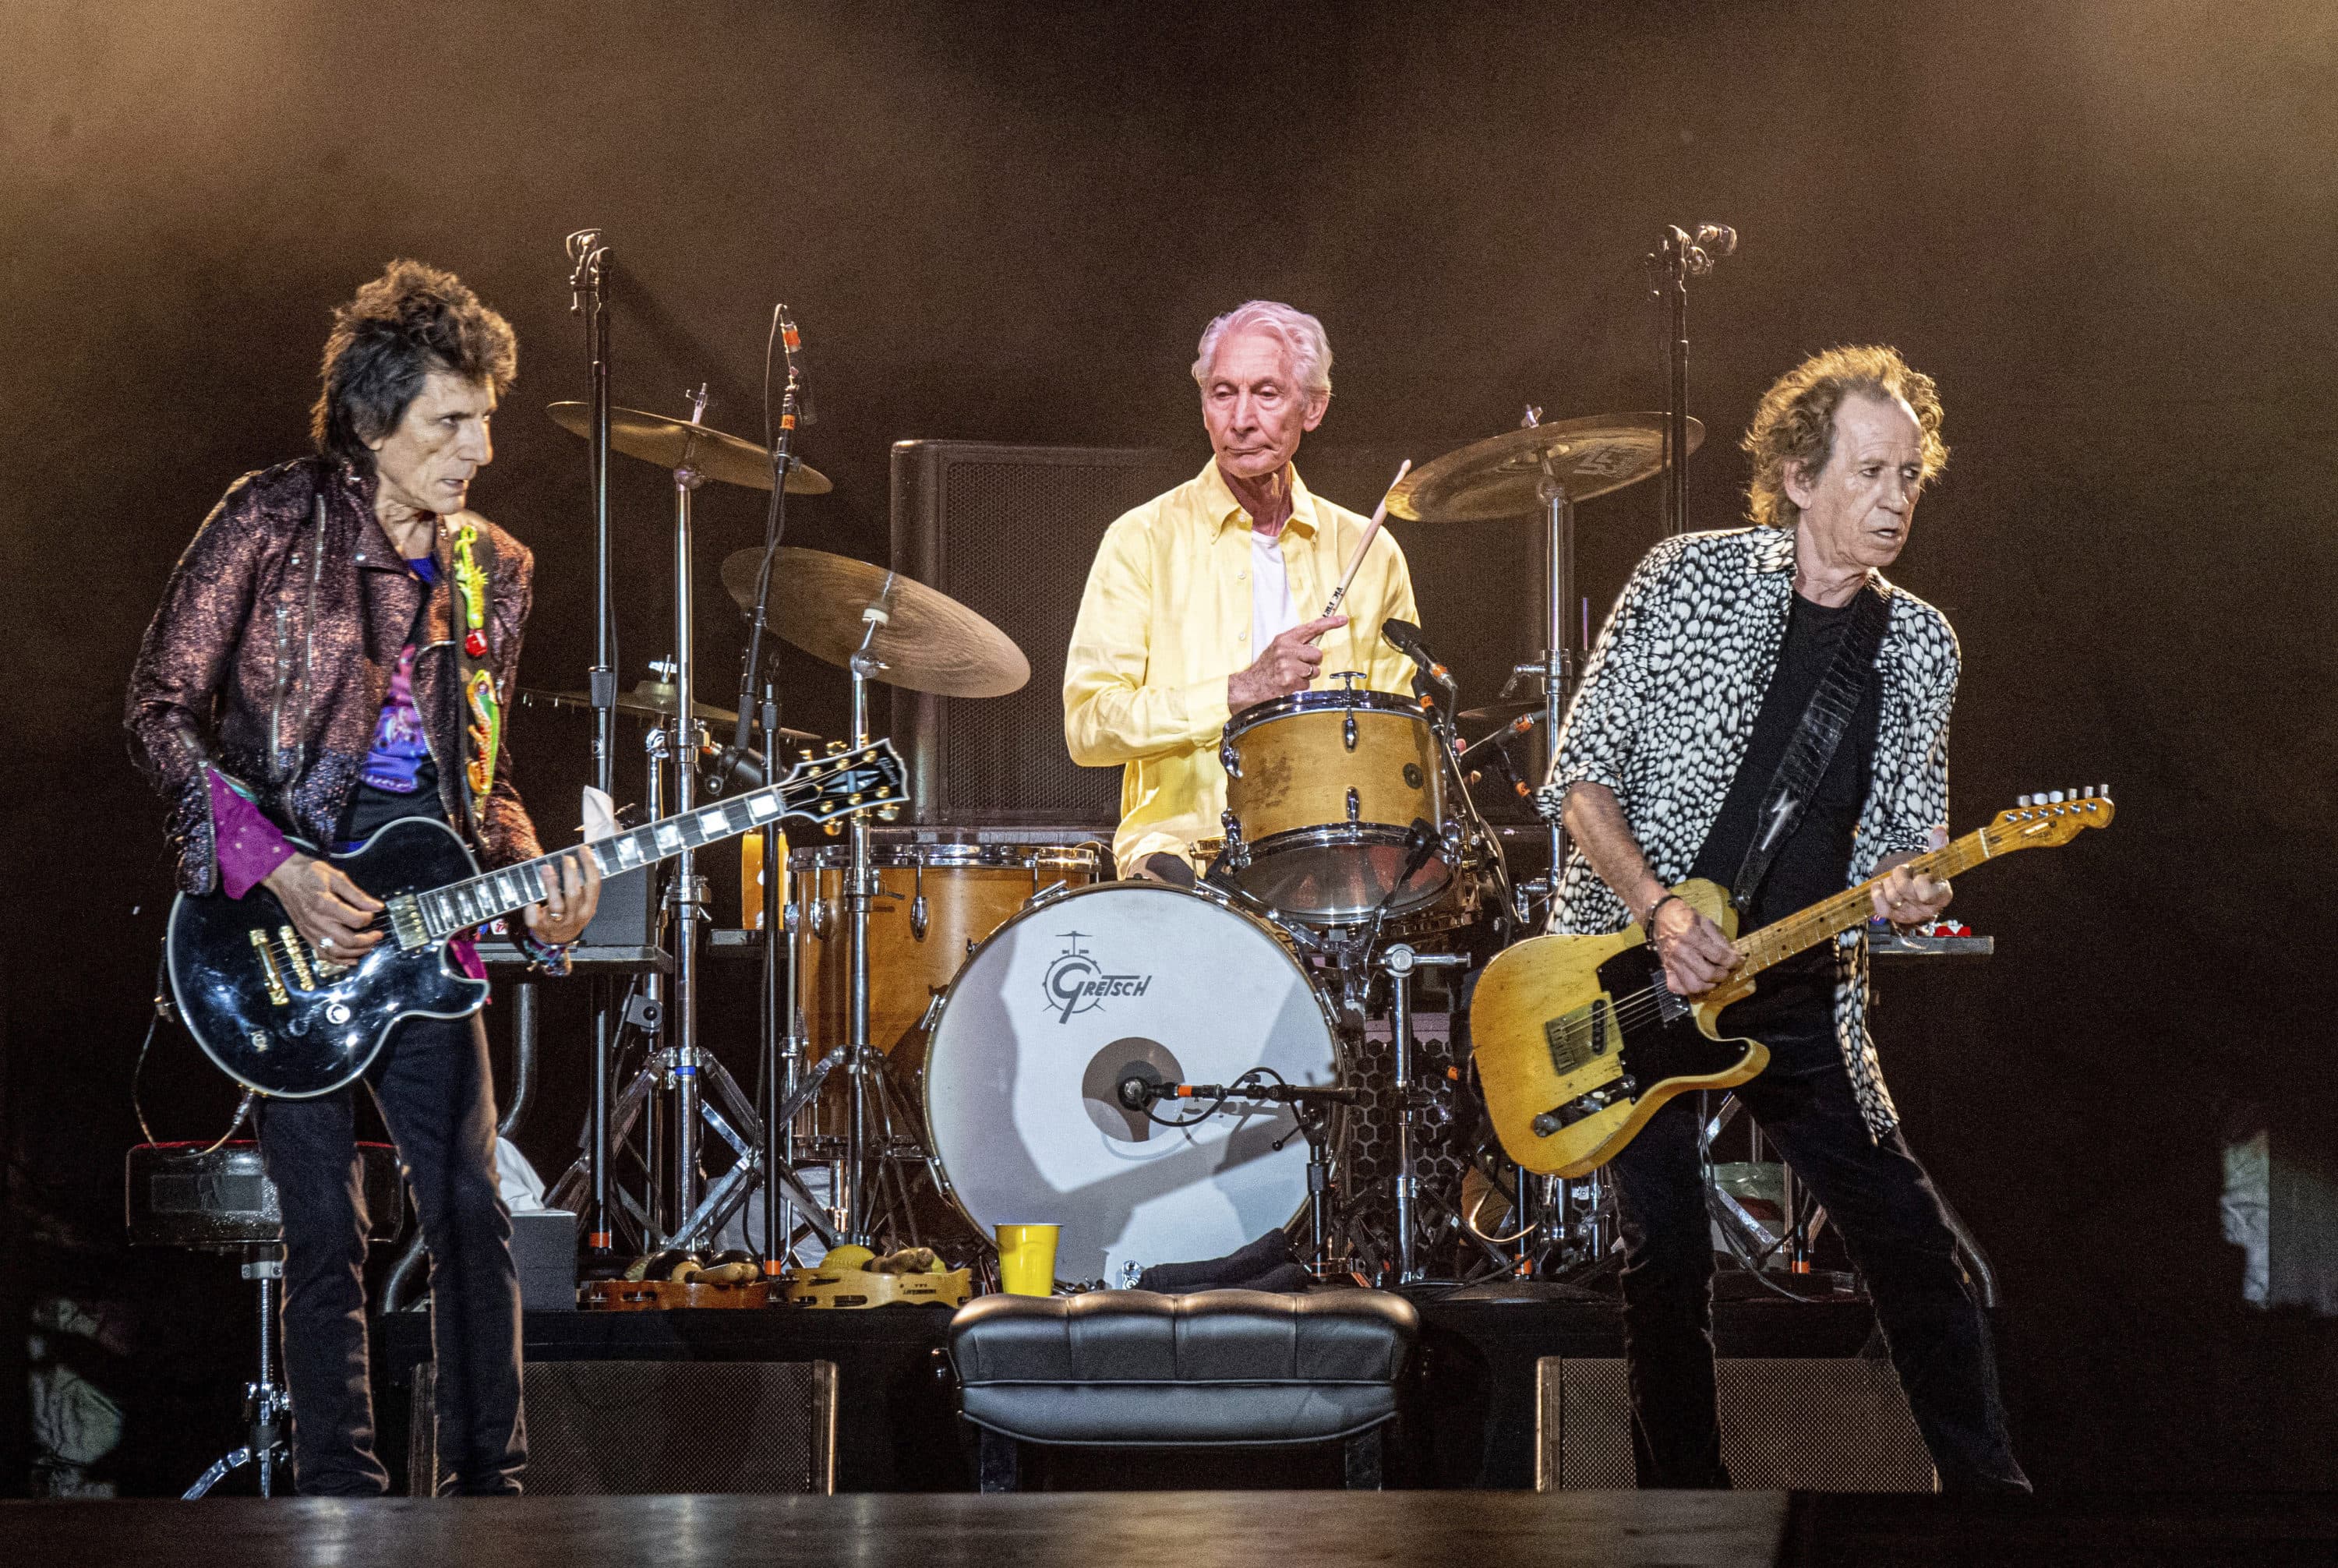 From left, Ronnie Wood, Charlie Watts and Keith Richards of The Rolling Stones perform on July 15, 2019, in New Orleans. Watts' publicist, Bernard Doherty, said Watts passed away peacefully in a London hospital surrounded by his family on Tuesday, Aug. 24, 2021. He was 80. (Amy Harris/Invision/AP)